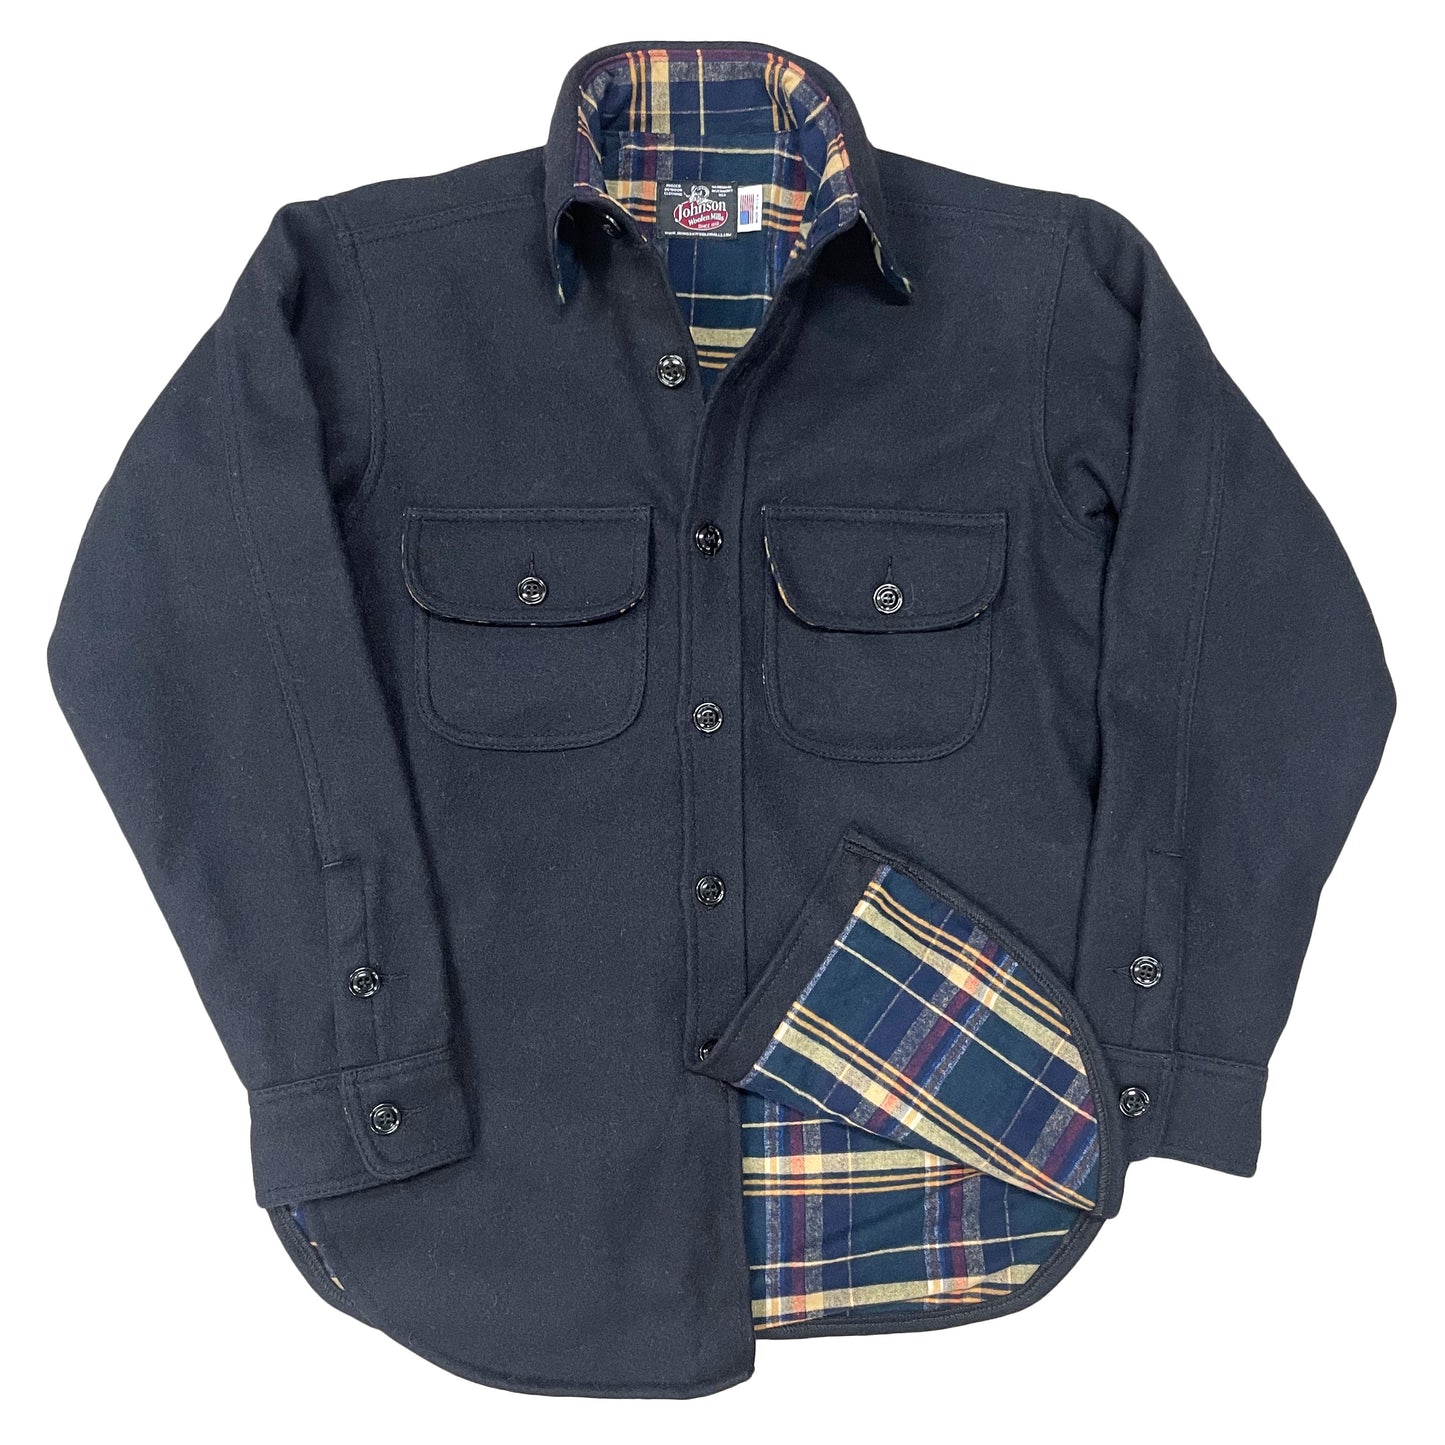 Long Tail Button Down long sleeve shirt with a 6 button front, button cuffs and two front chest pockets. Shown in night navy